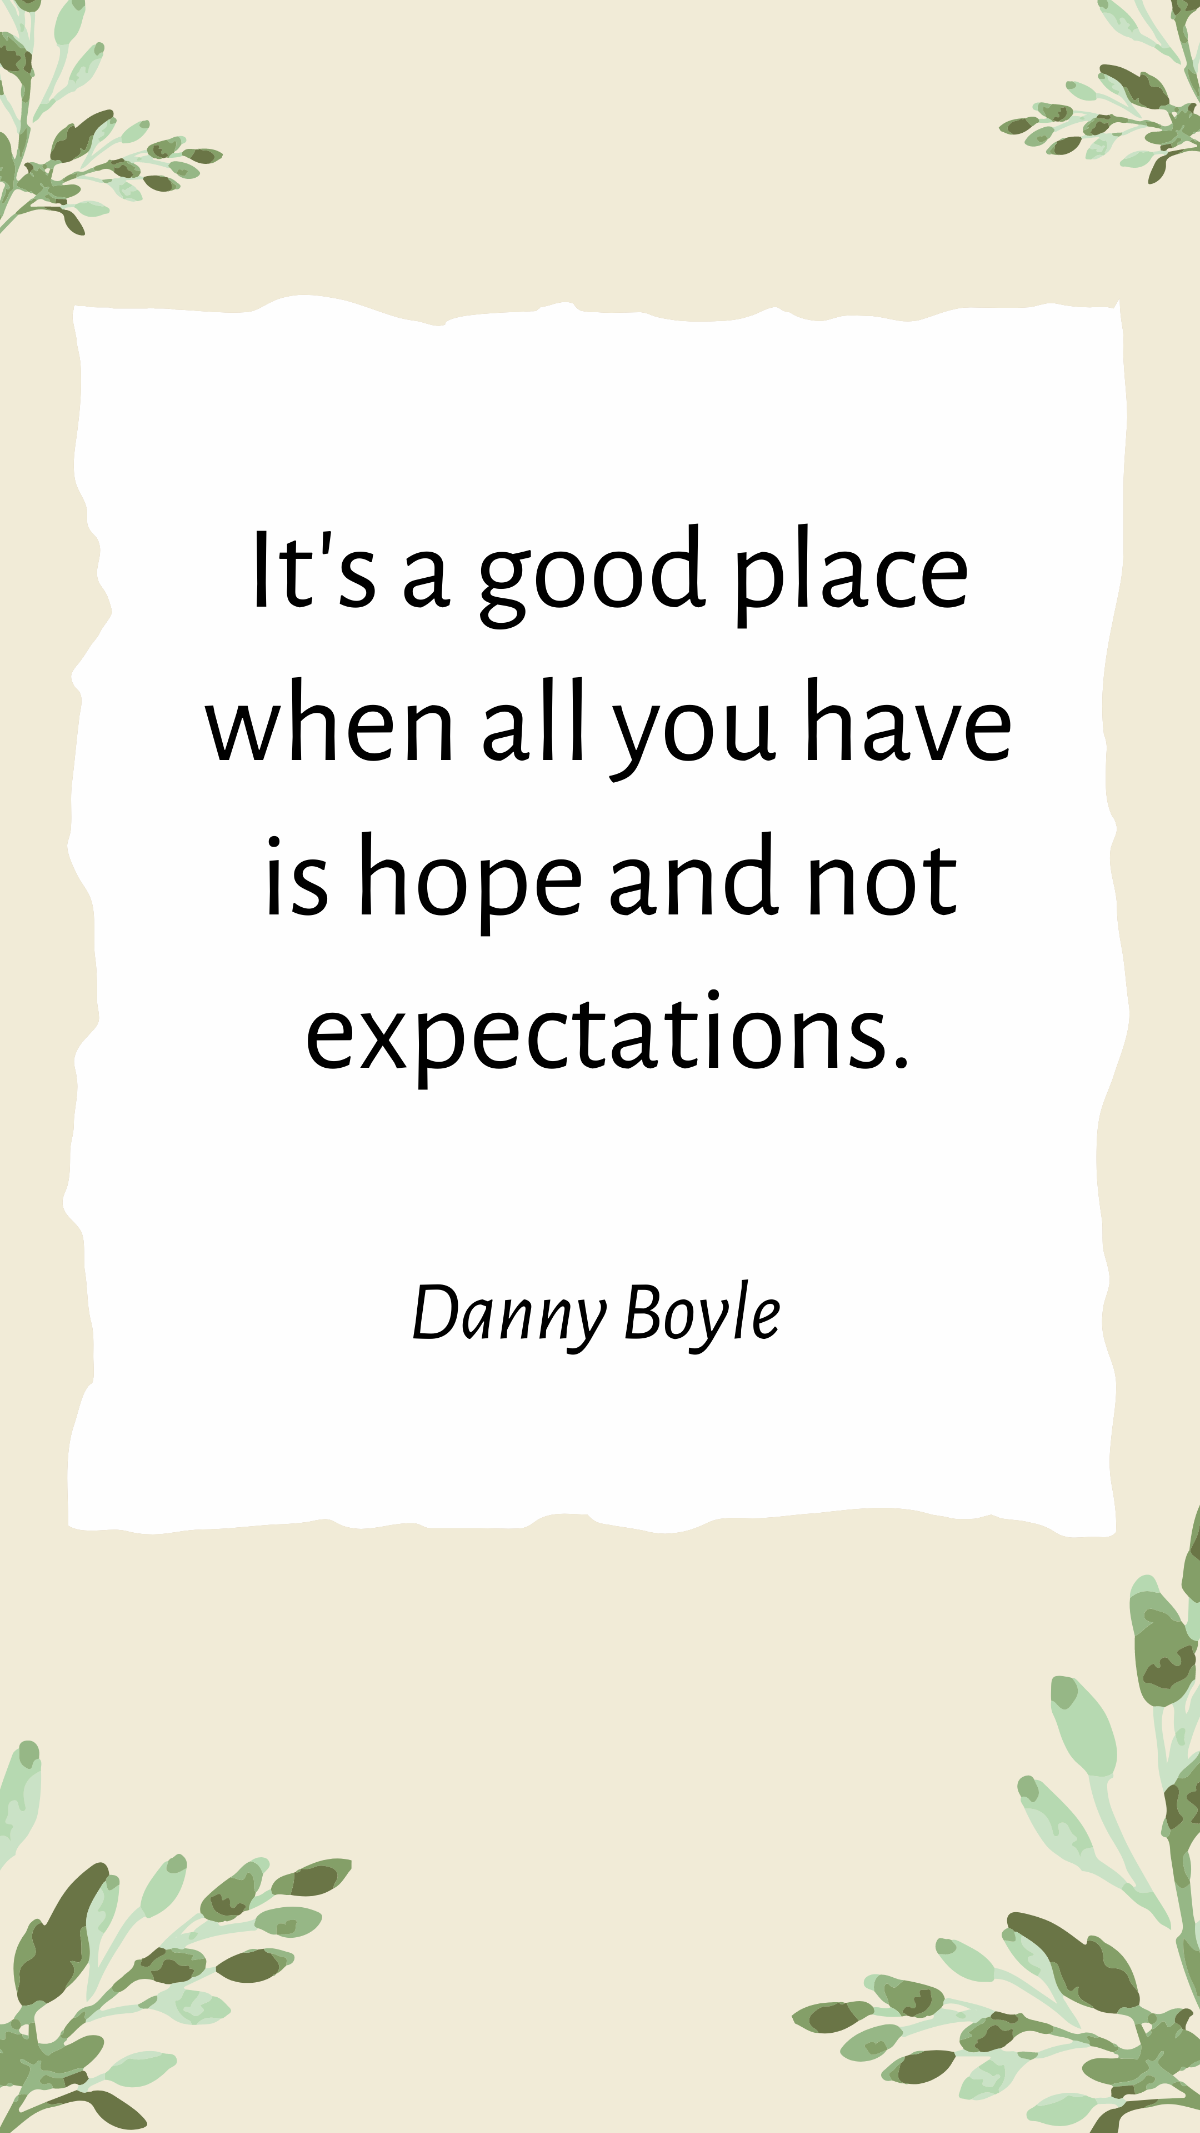 Free Danny Boyle - It's a good place when all you have is hope and not expectations. Template